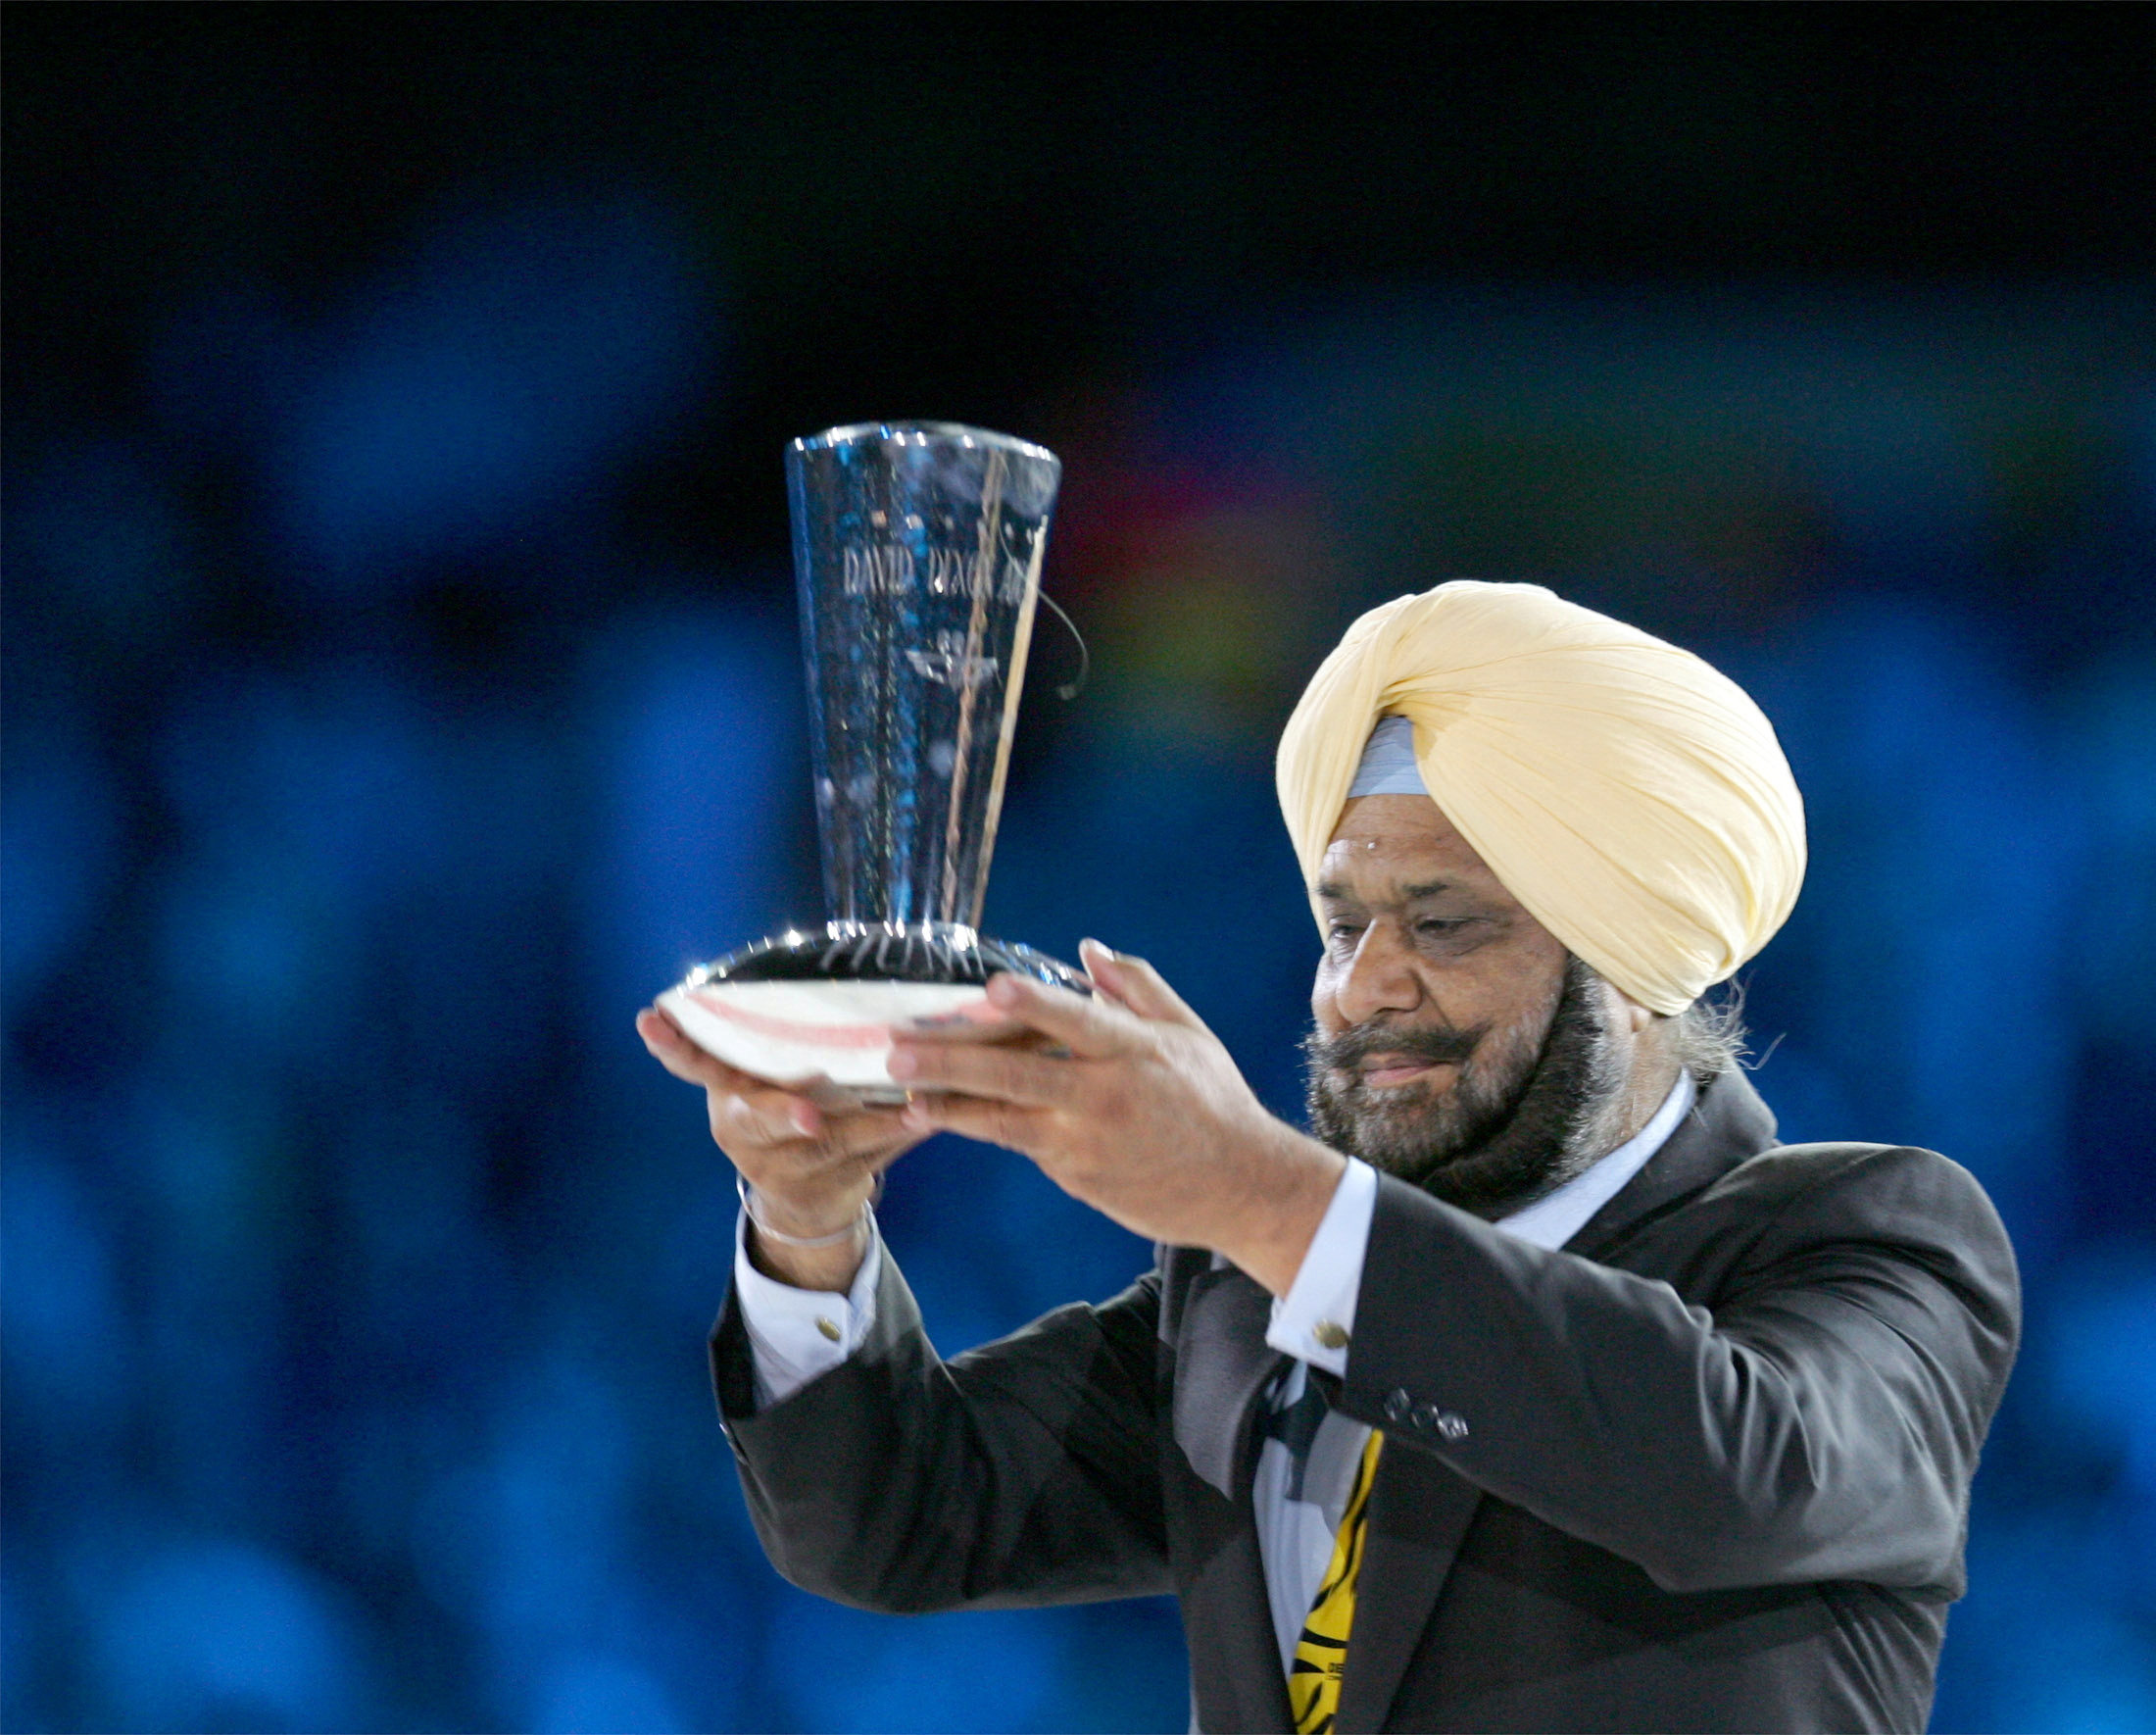 India’s Randhir Singh expects the Asian Games in China to be the greatest ever. Photo: Reuters